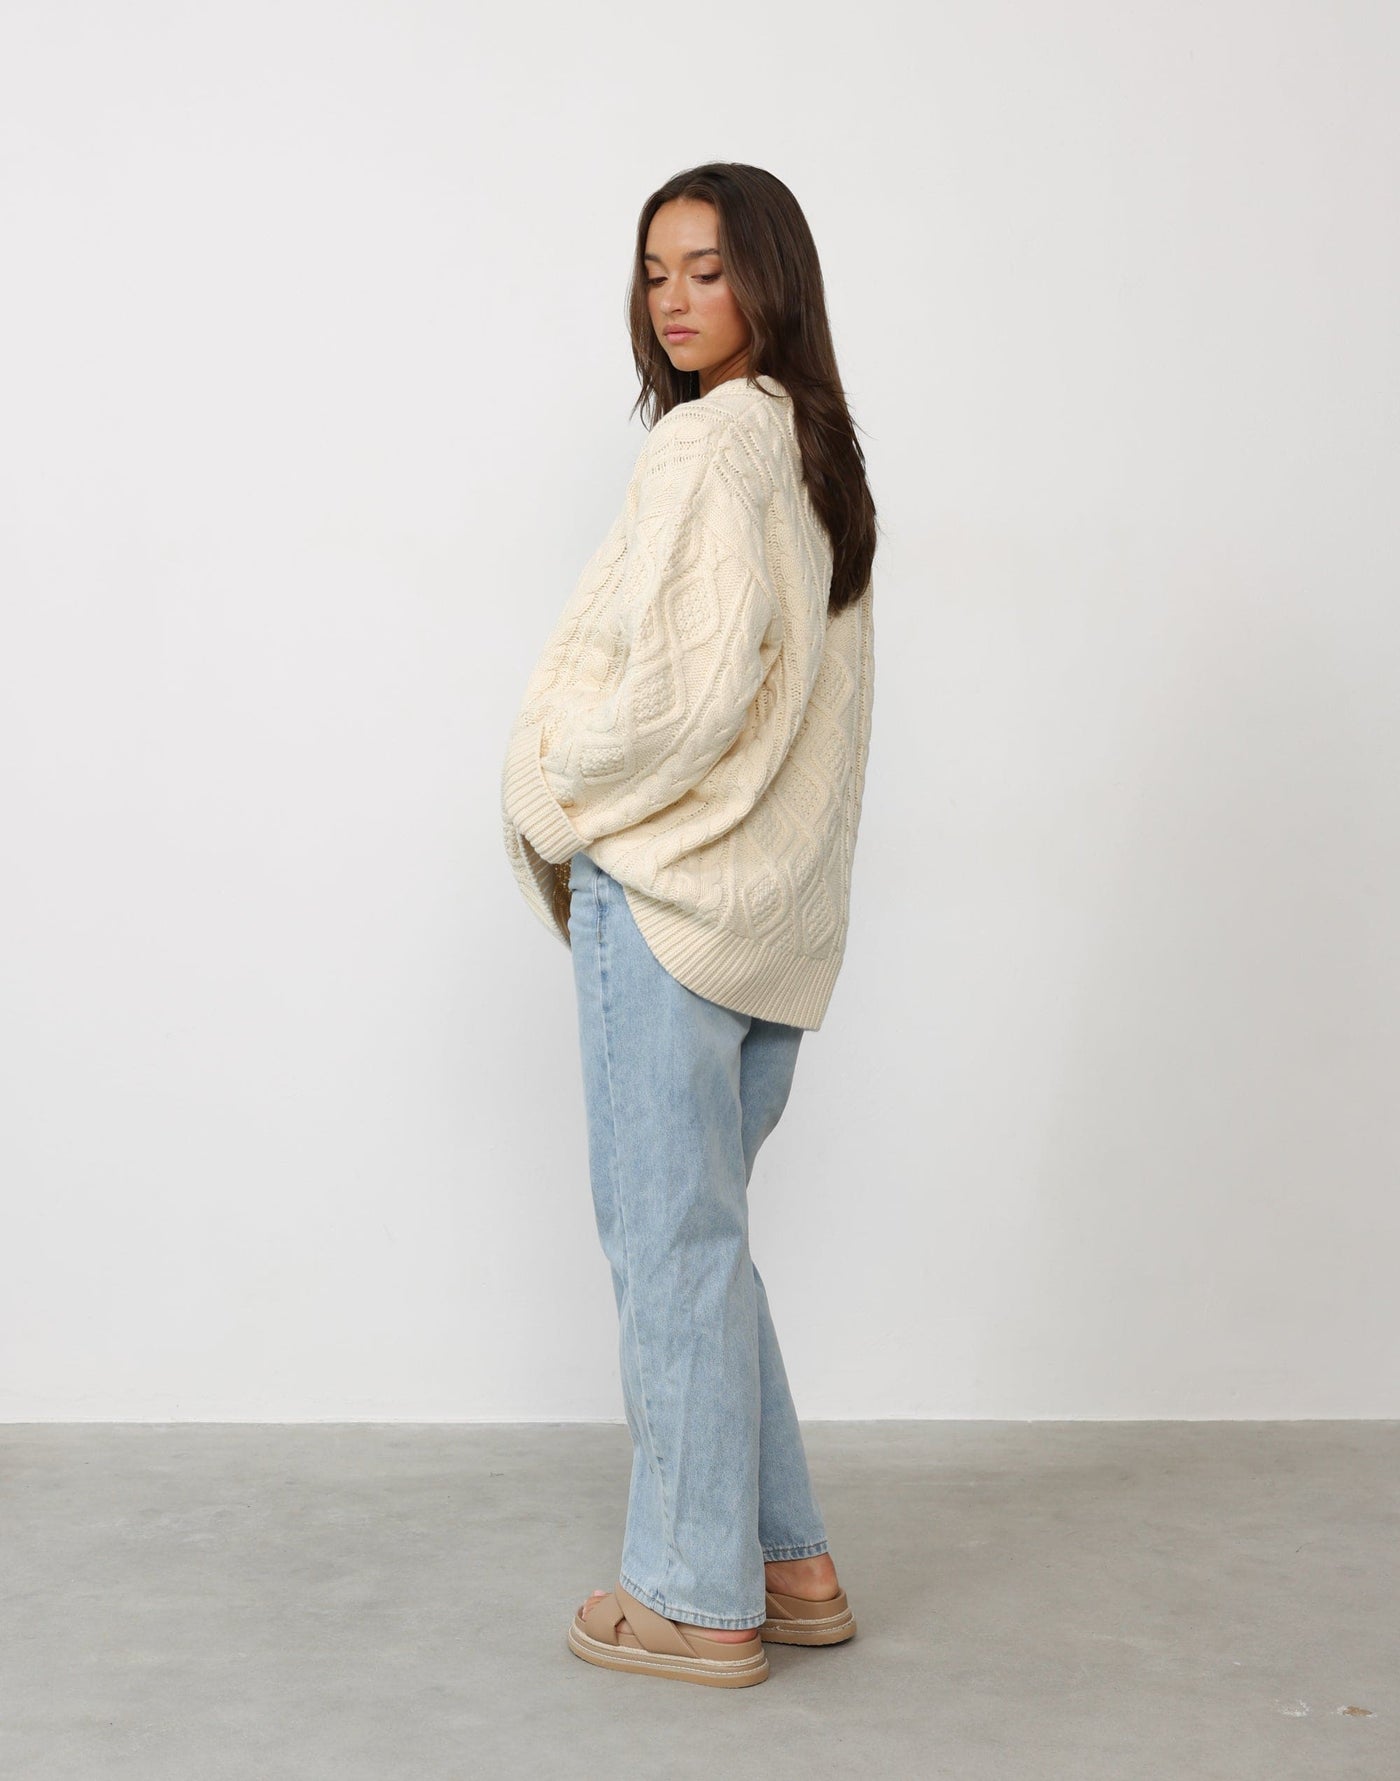 Gigi Knit (Ivory) - By Lioness - Cable Knit Design Oversized Slouched Fit Jumper - Women's Top - Charcoal Clothing